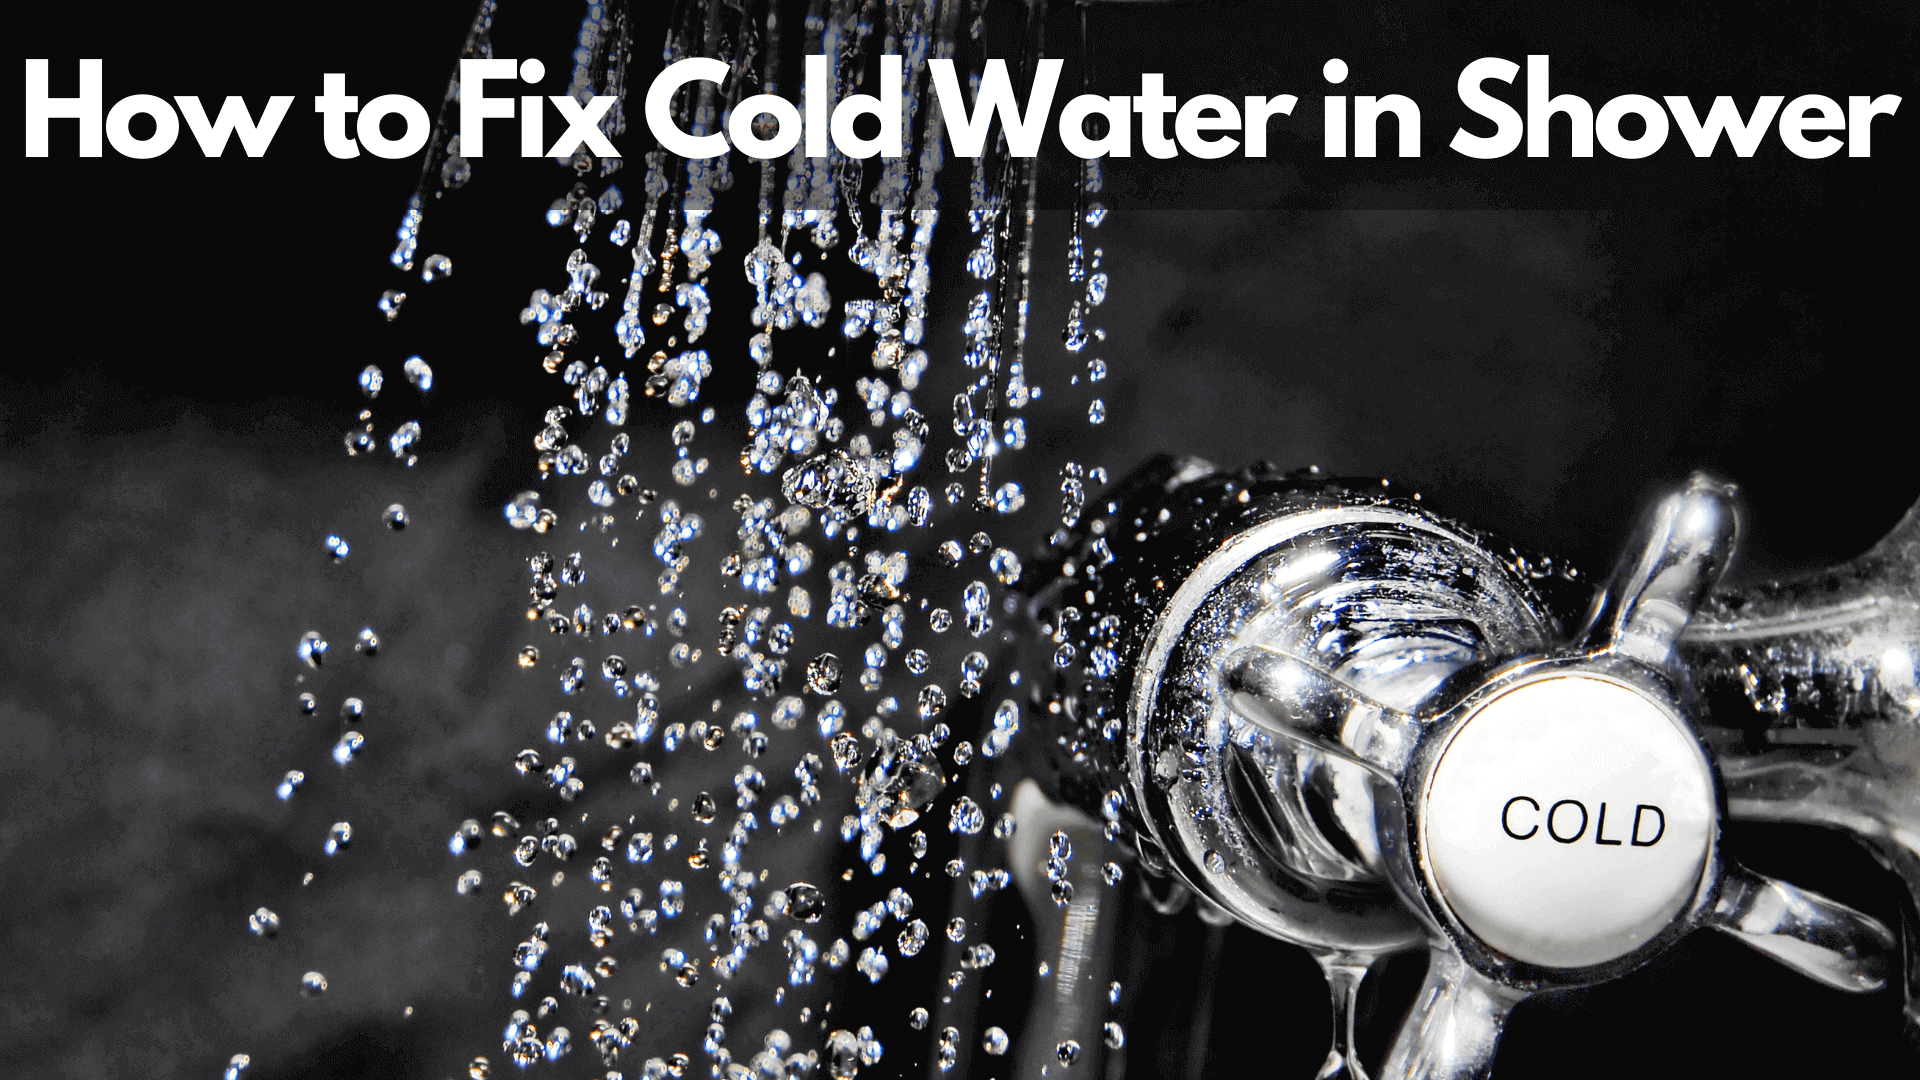 How to Fix Cold Water in Shower